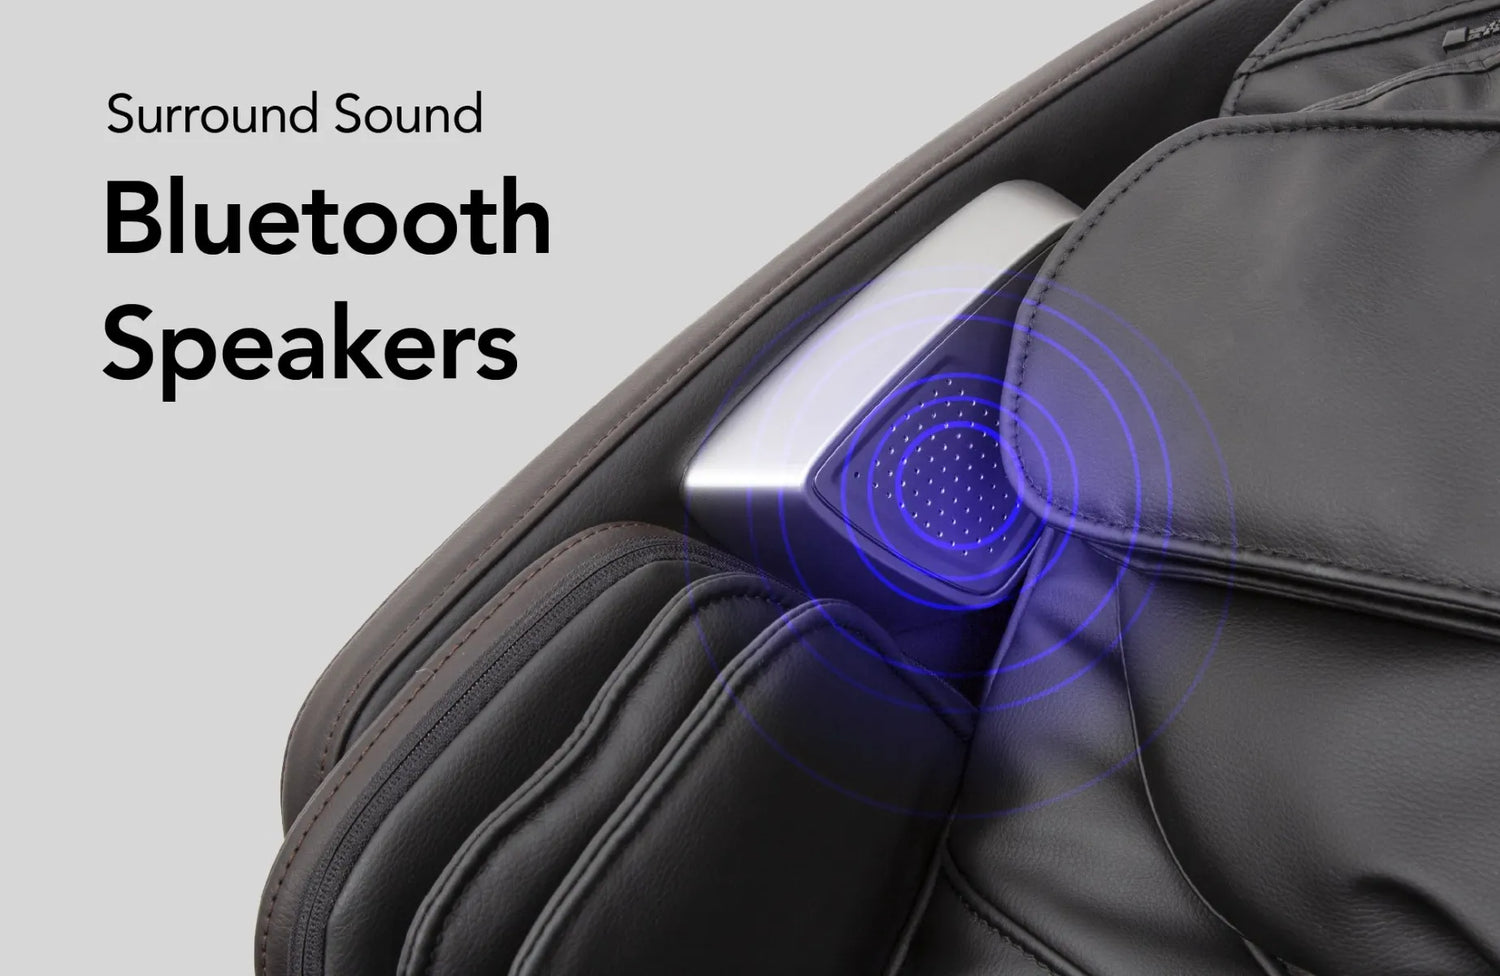 The Titan Jupiter Premium LE Massage Chair has Bluetooth speakers on either side of the headrest with superb audio quality.